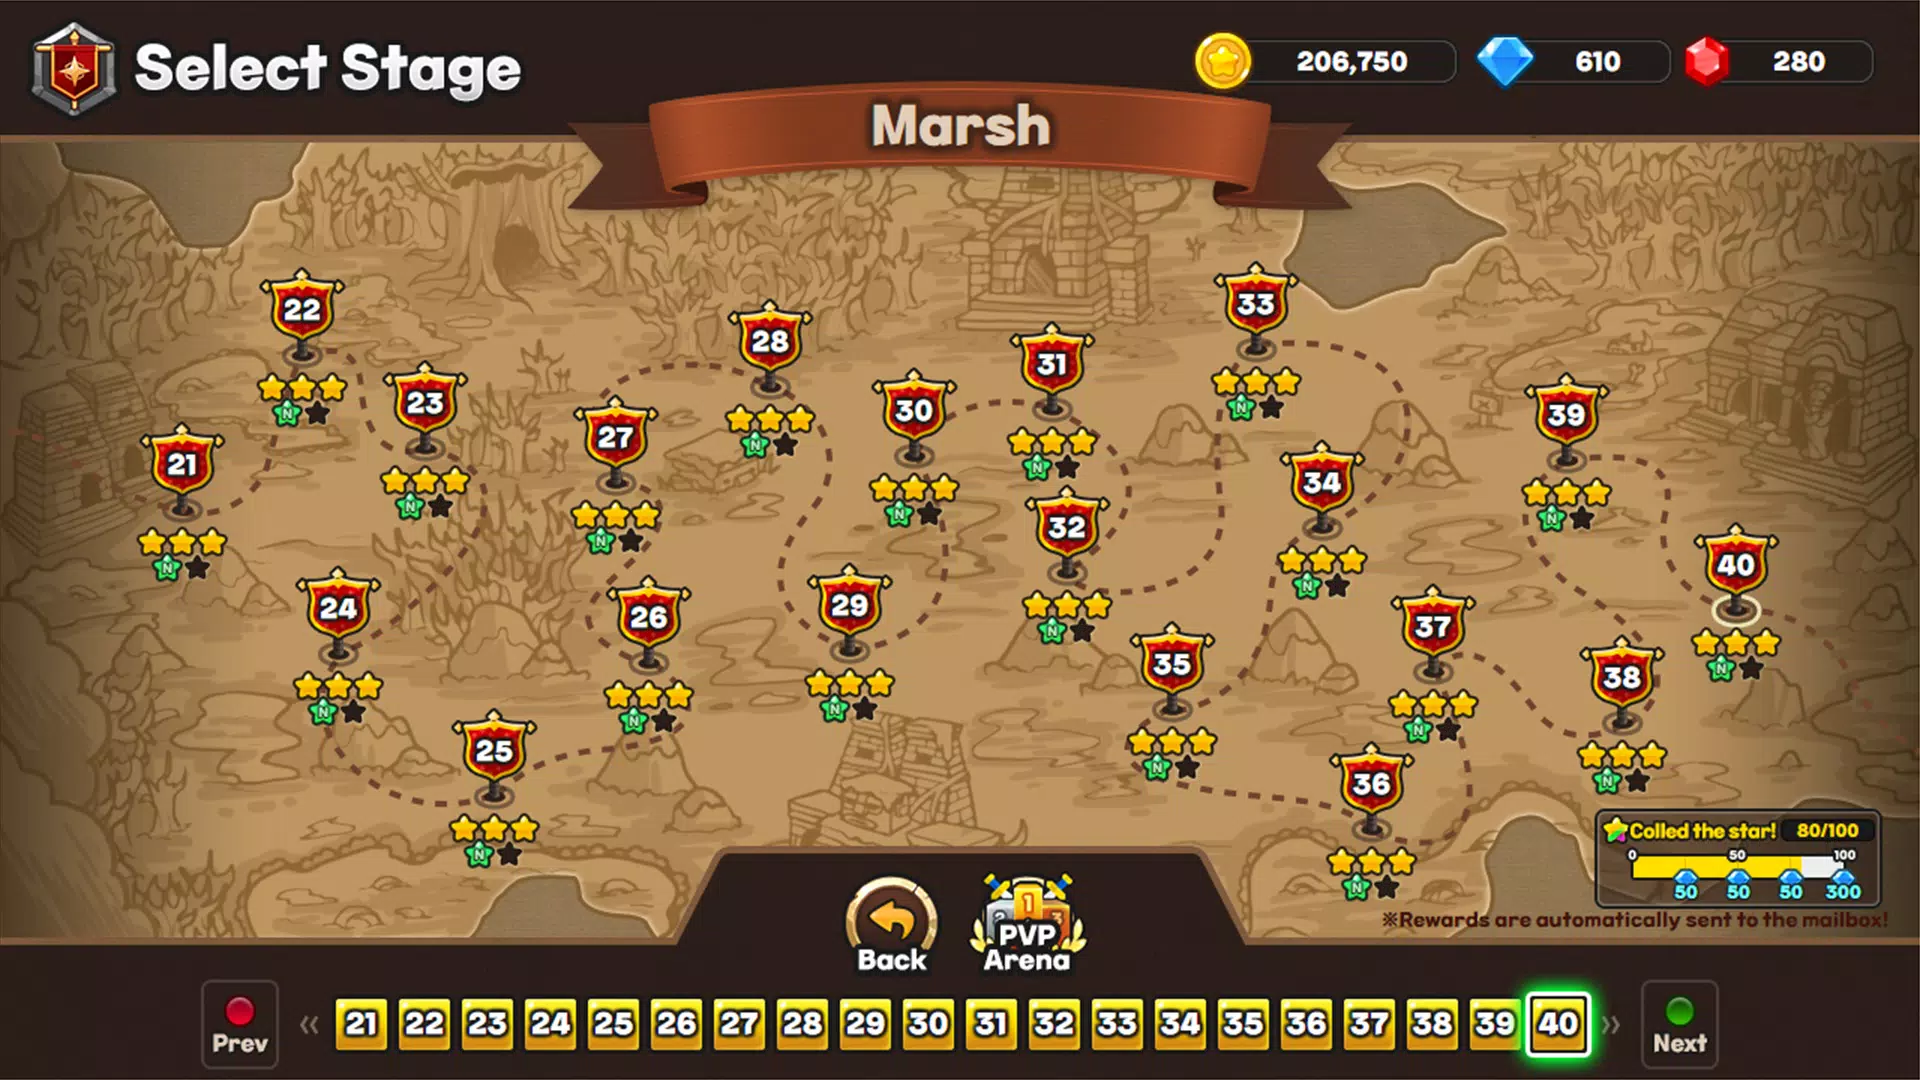 Gold tower defence M 2.1.13 Free Download